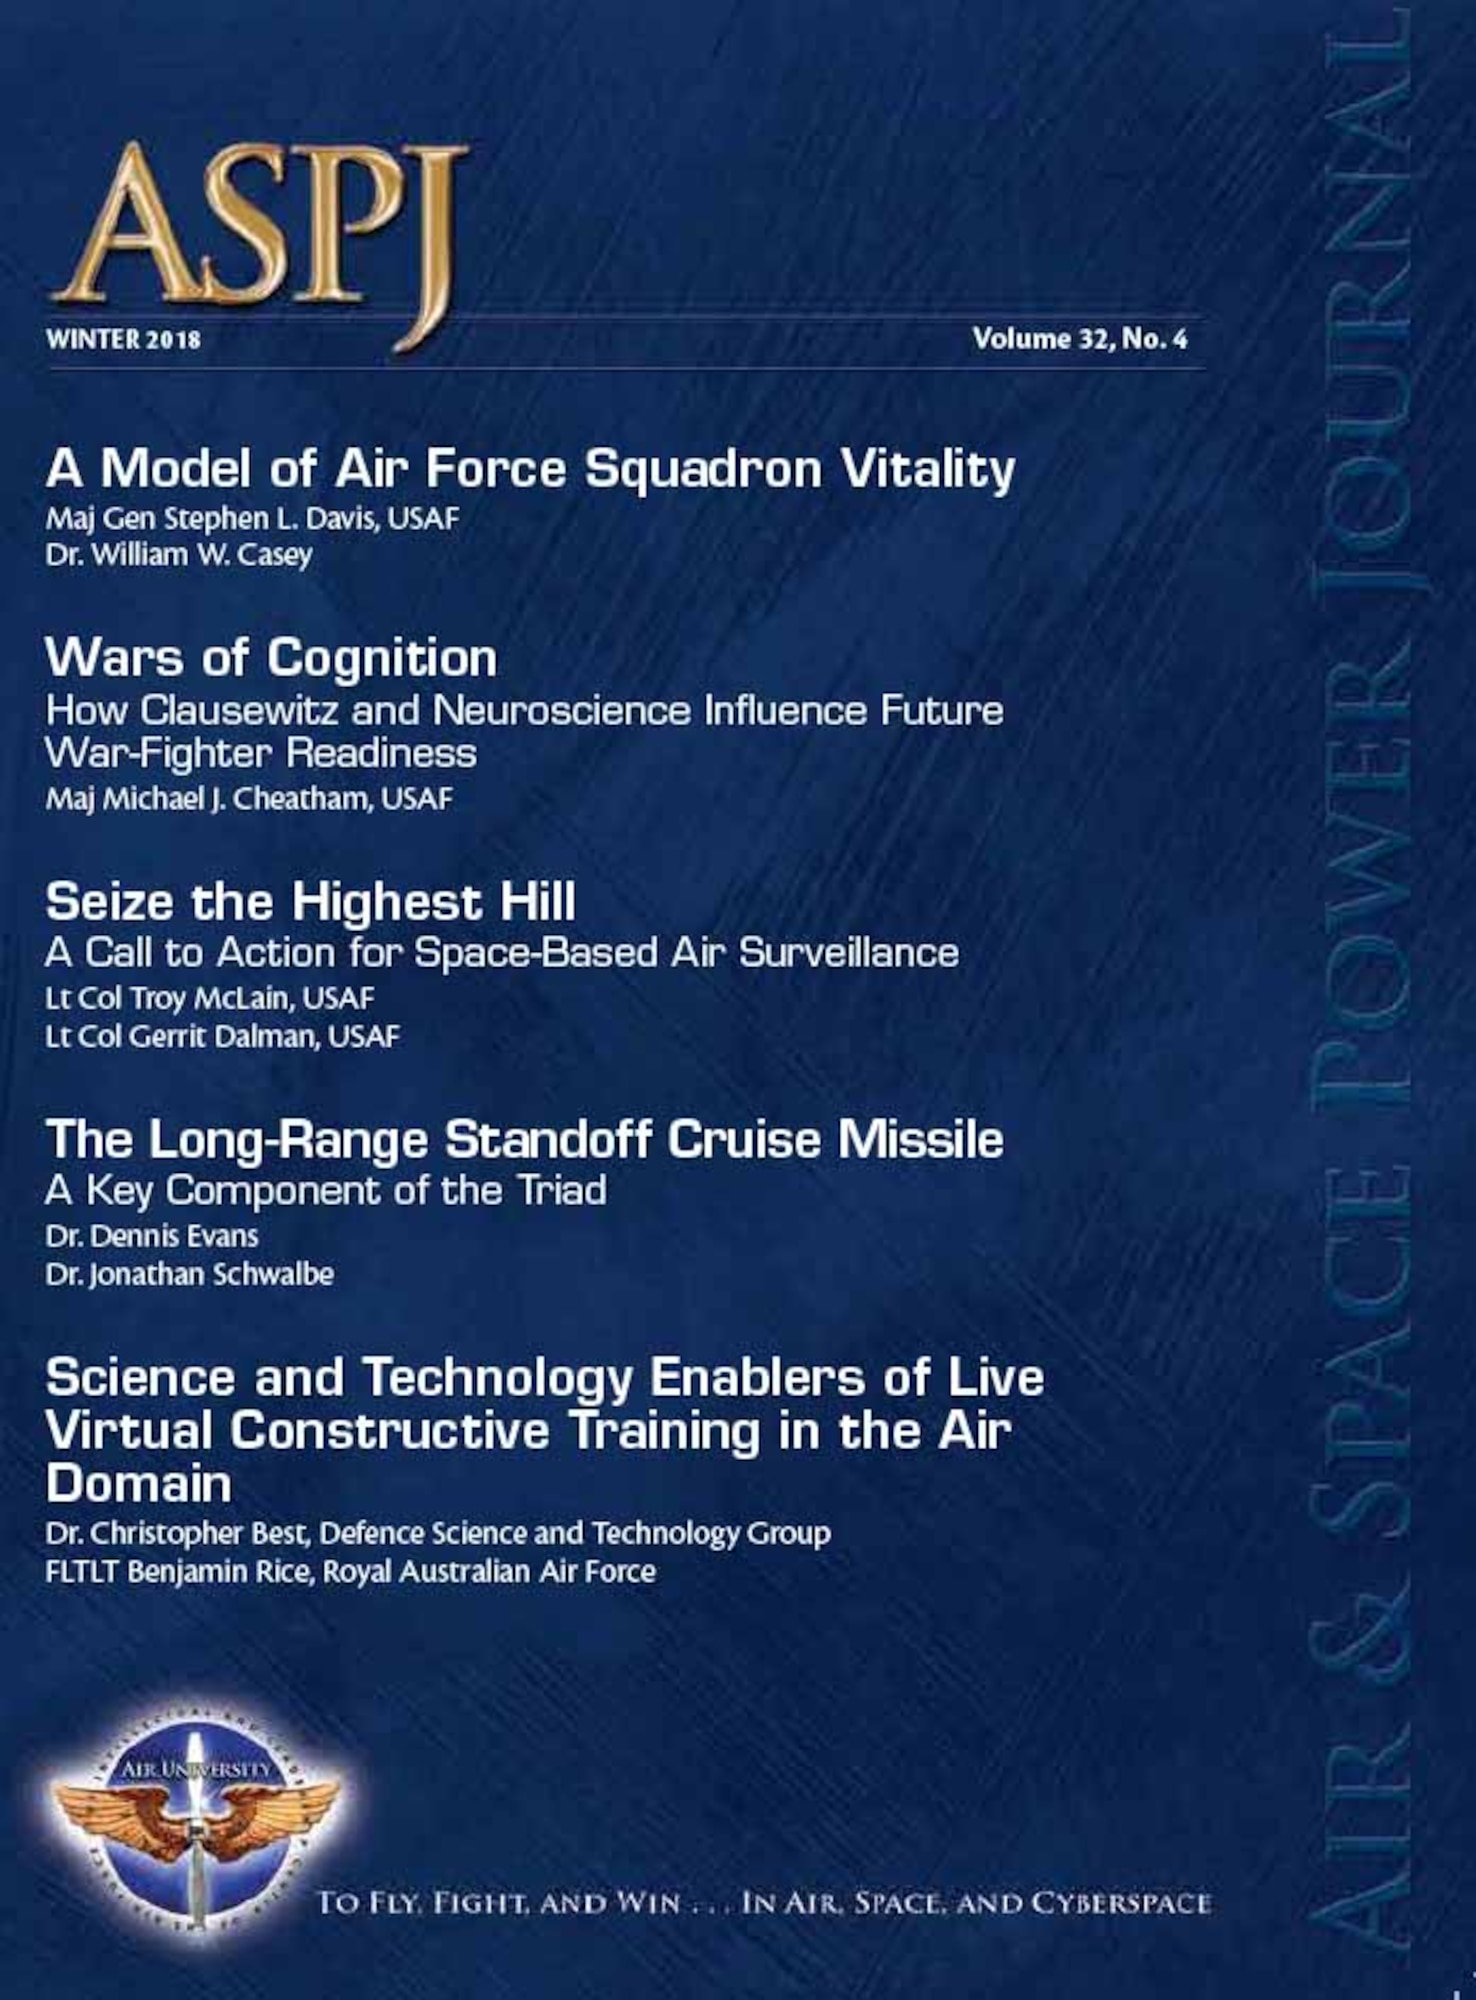 The Winter 2018 Air and Space Power Journal, published by Air University Press, is available at www.airuniversity.af.edu/ASPJ/.